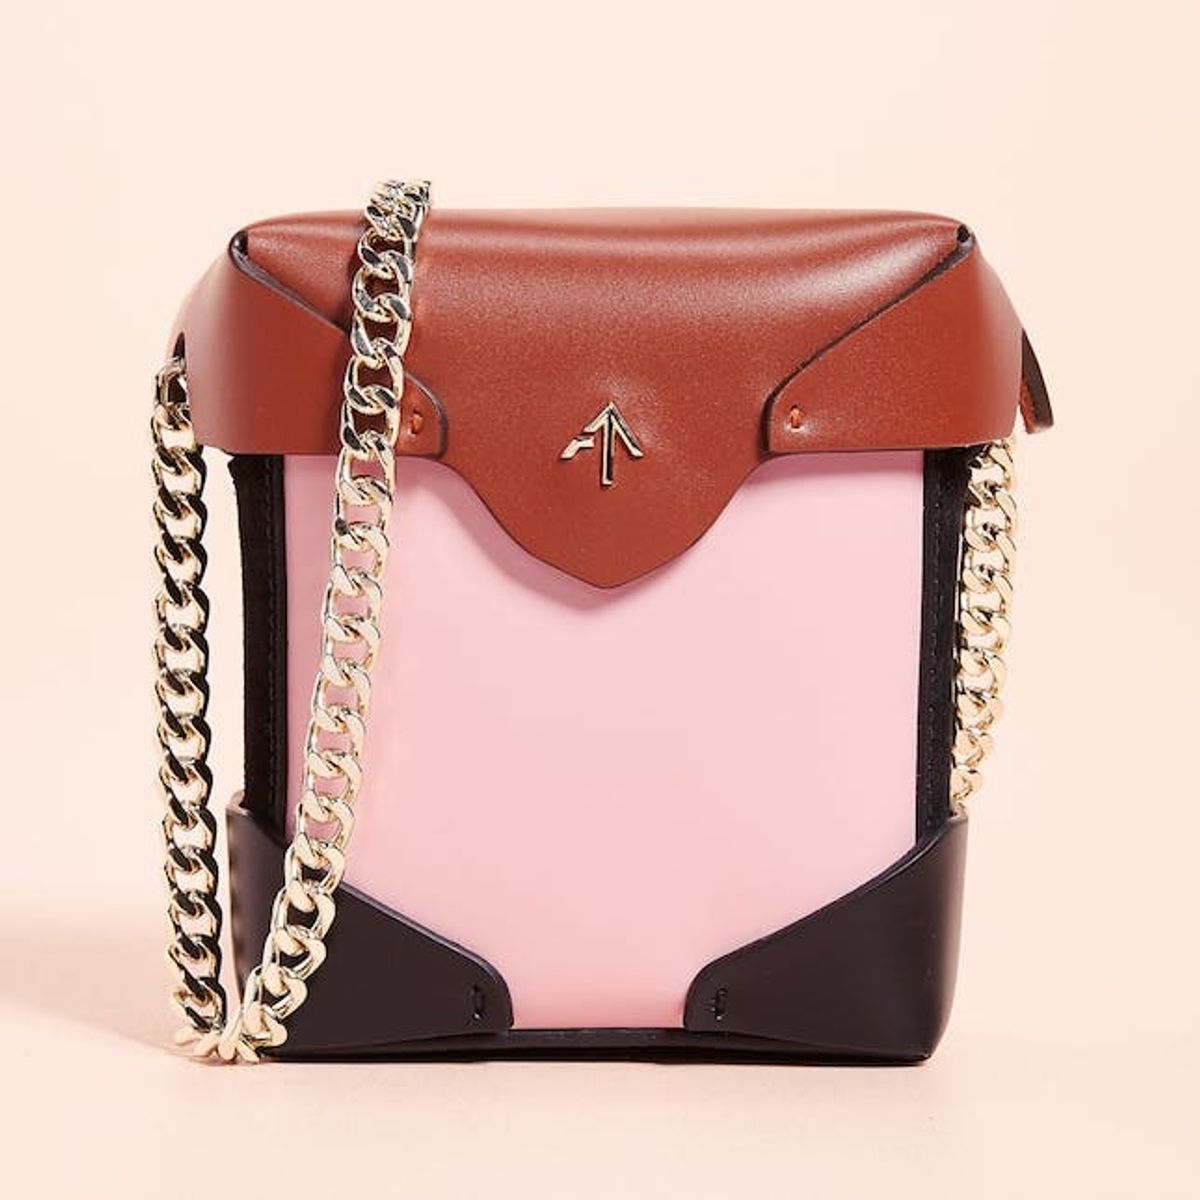 10 Fall Bags That Top Our Shopping List